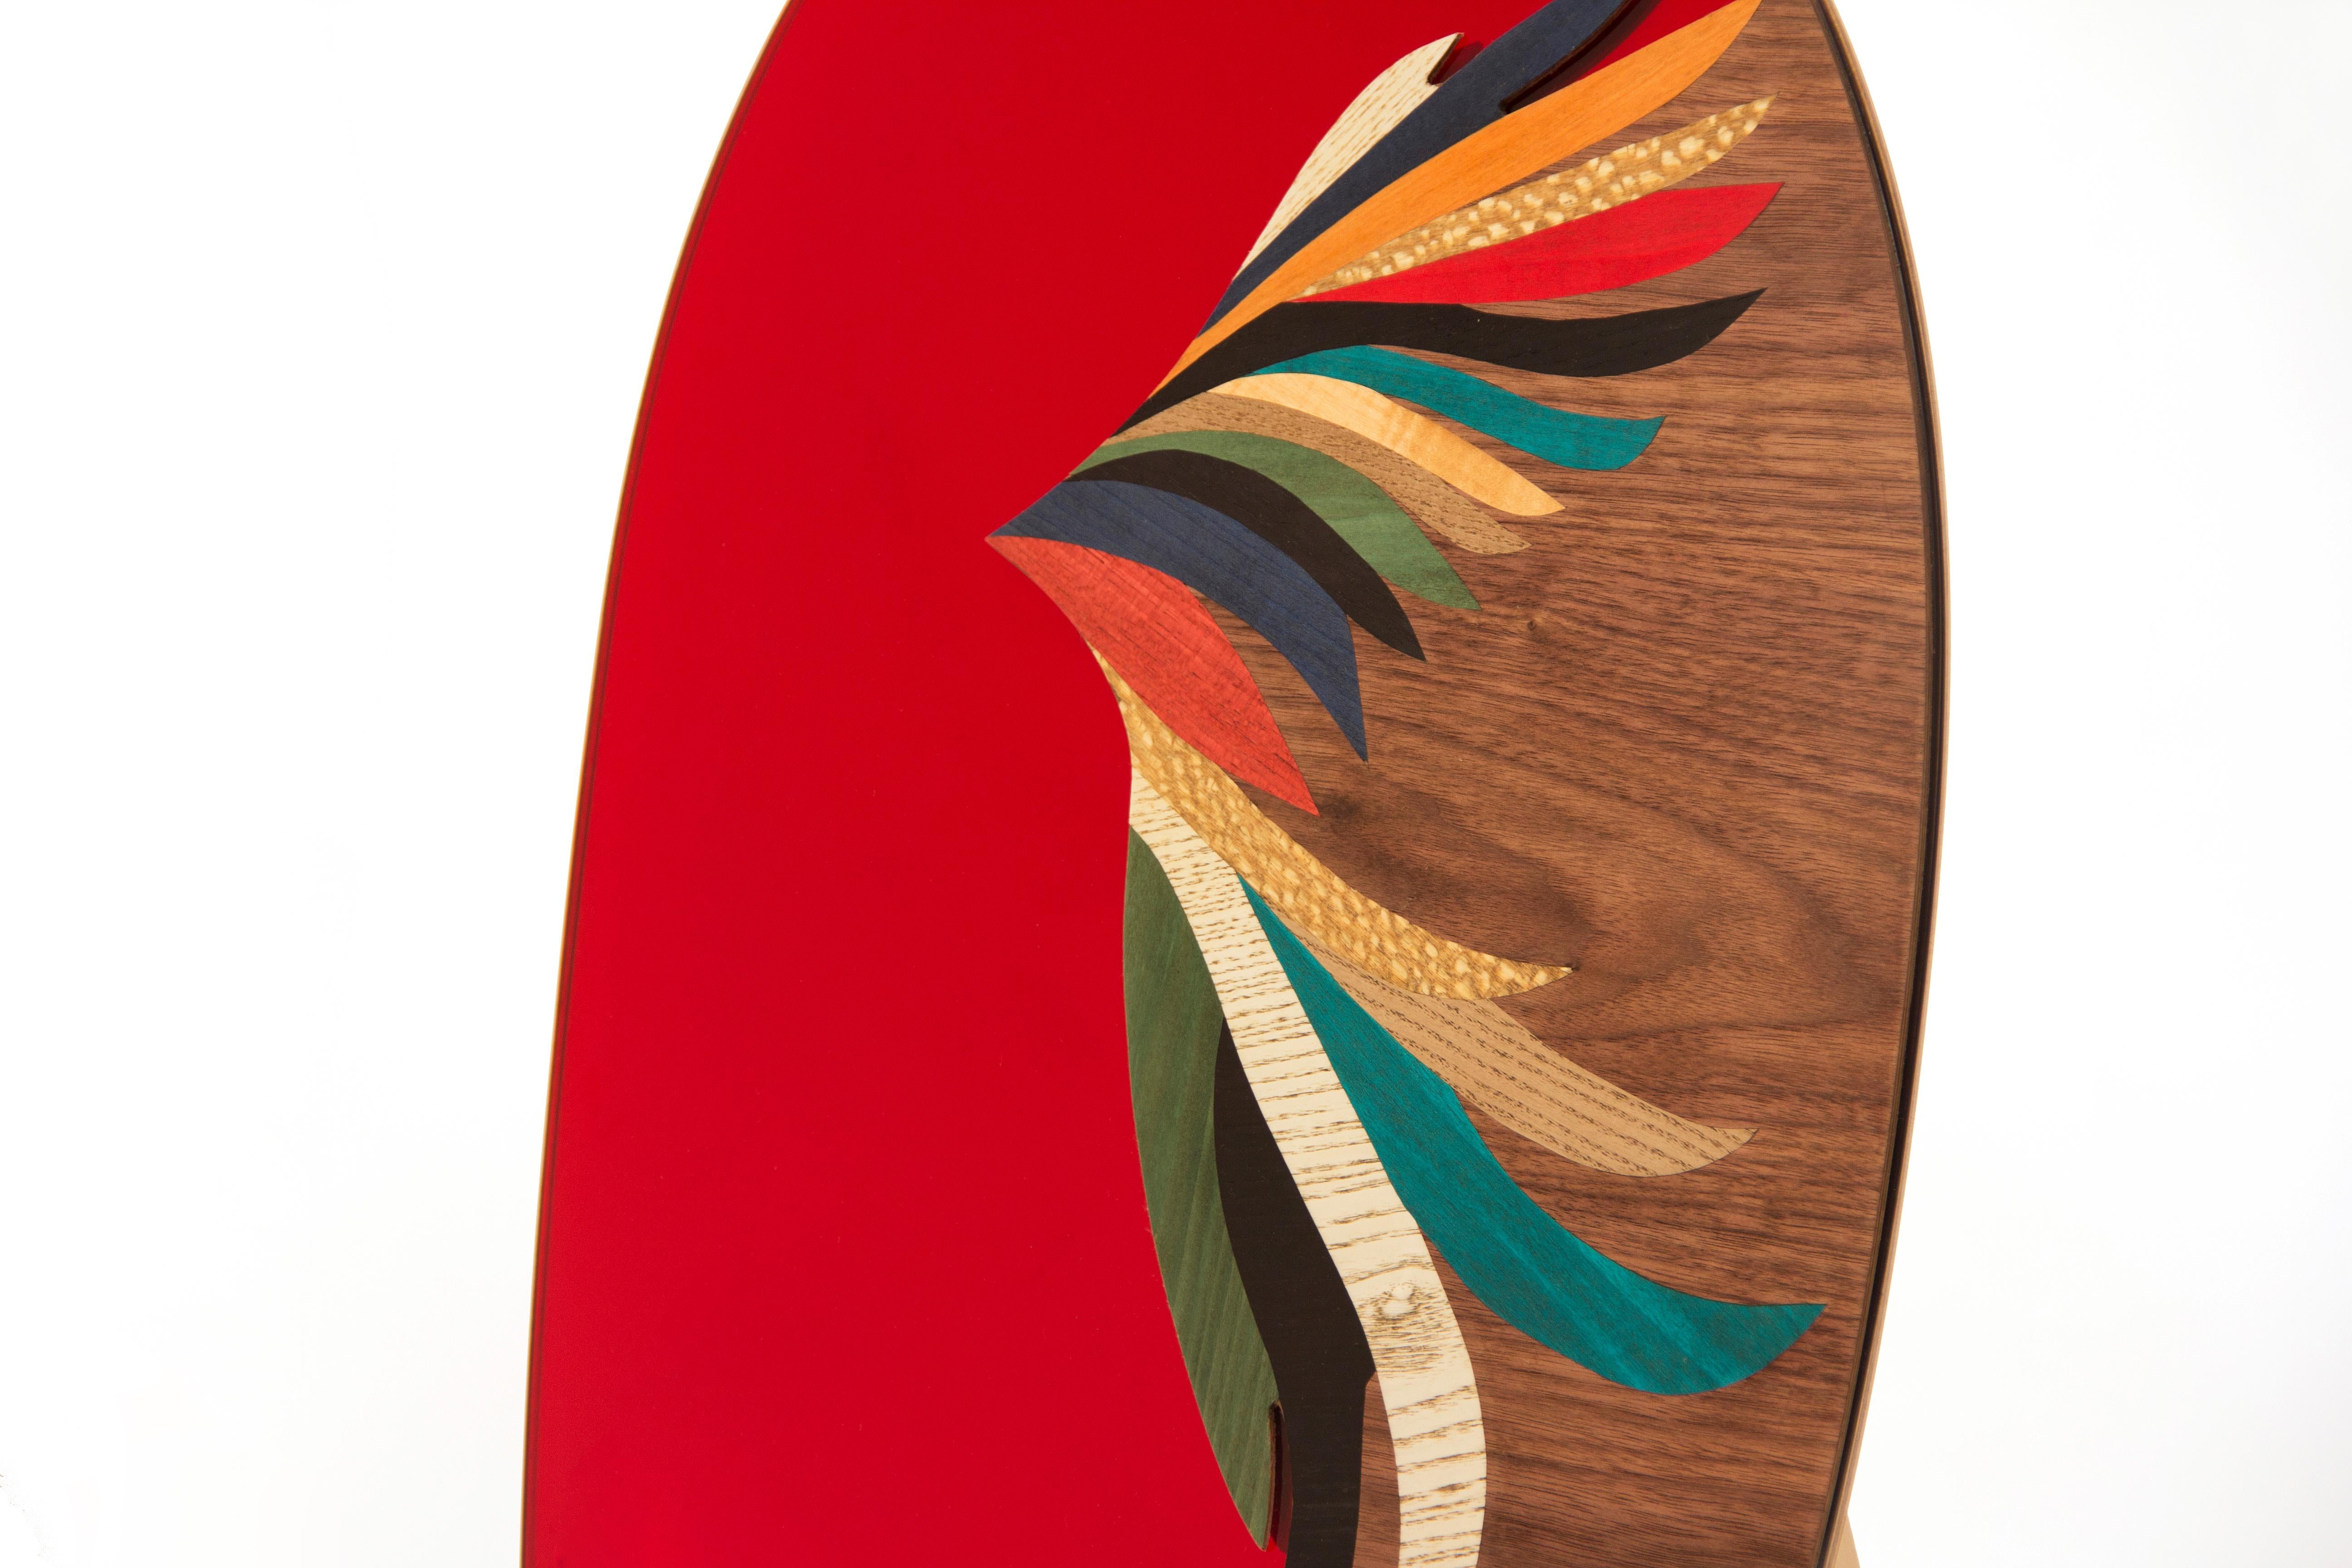 A collection of mirrors inspired by the silhouette of the Quetzal, a bird of great relevance for the Mexican and Central American culture. Bold colors are a distinctive feature of Quetzal mirrors. 
Mirrors that combines colored glass paired with